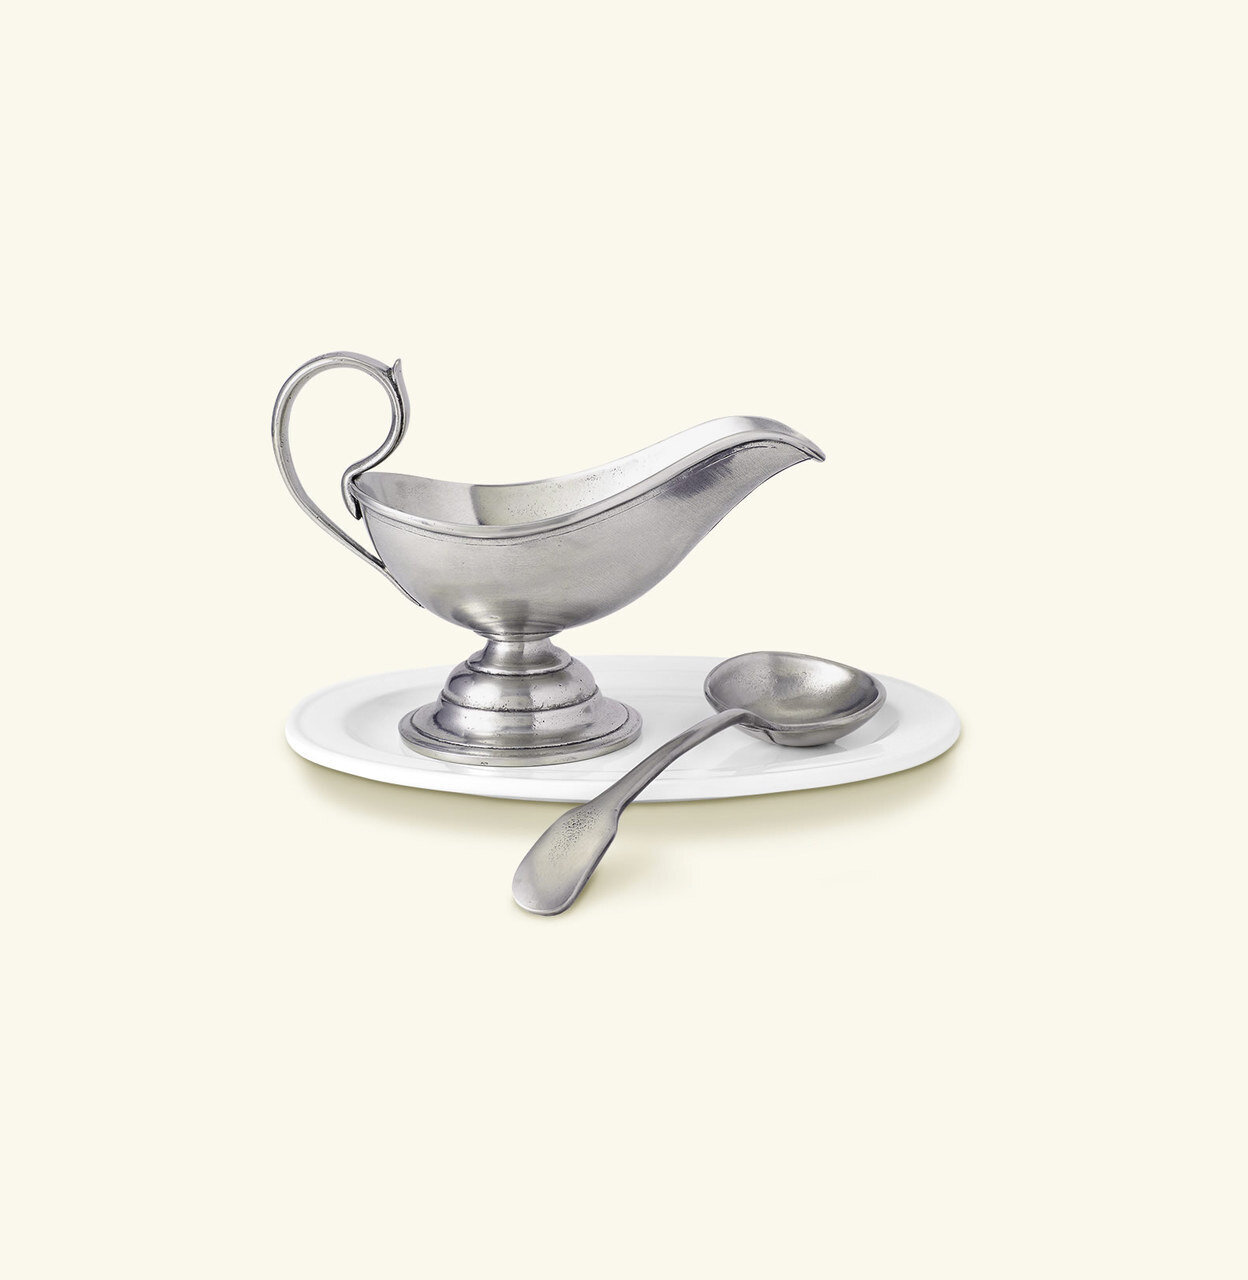 Match Pewter Gravy Boat With Spoon Set 879.4